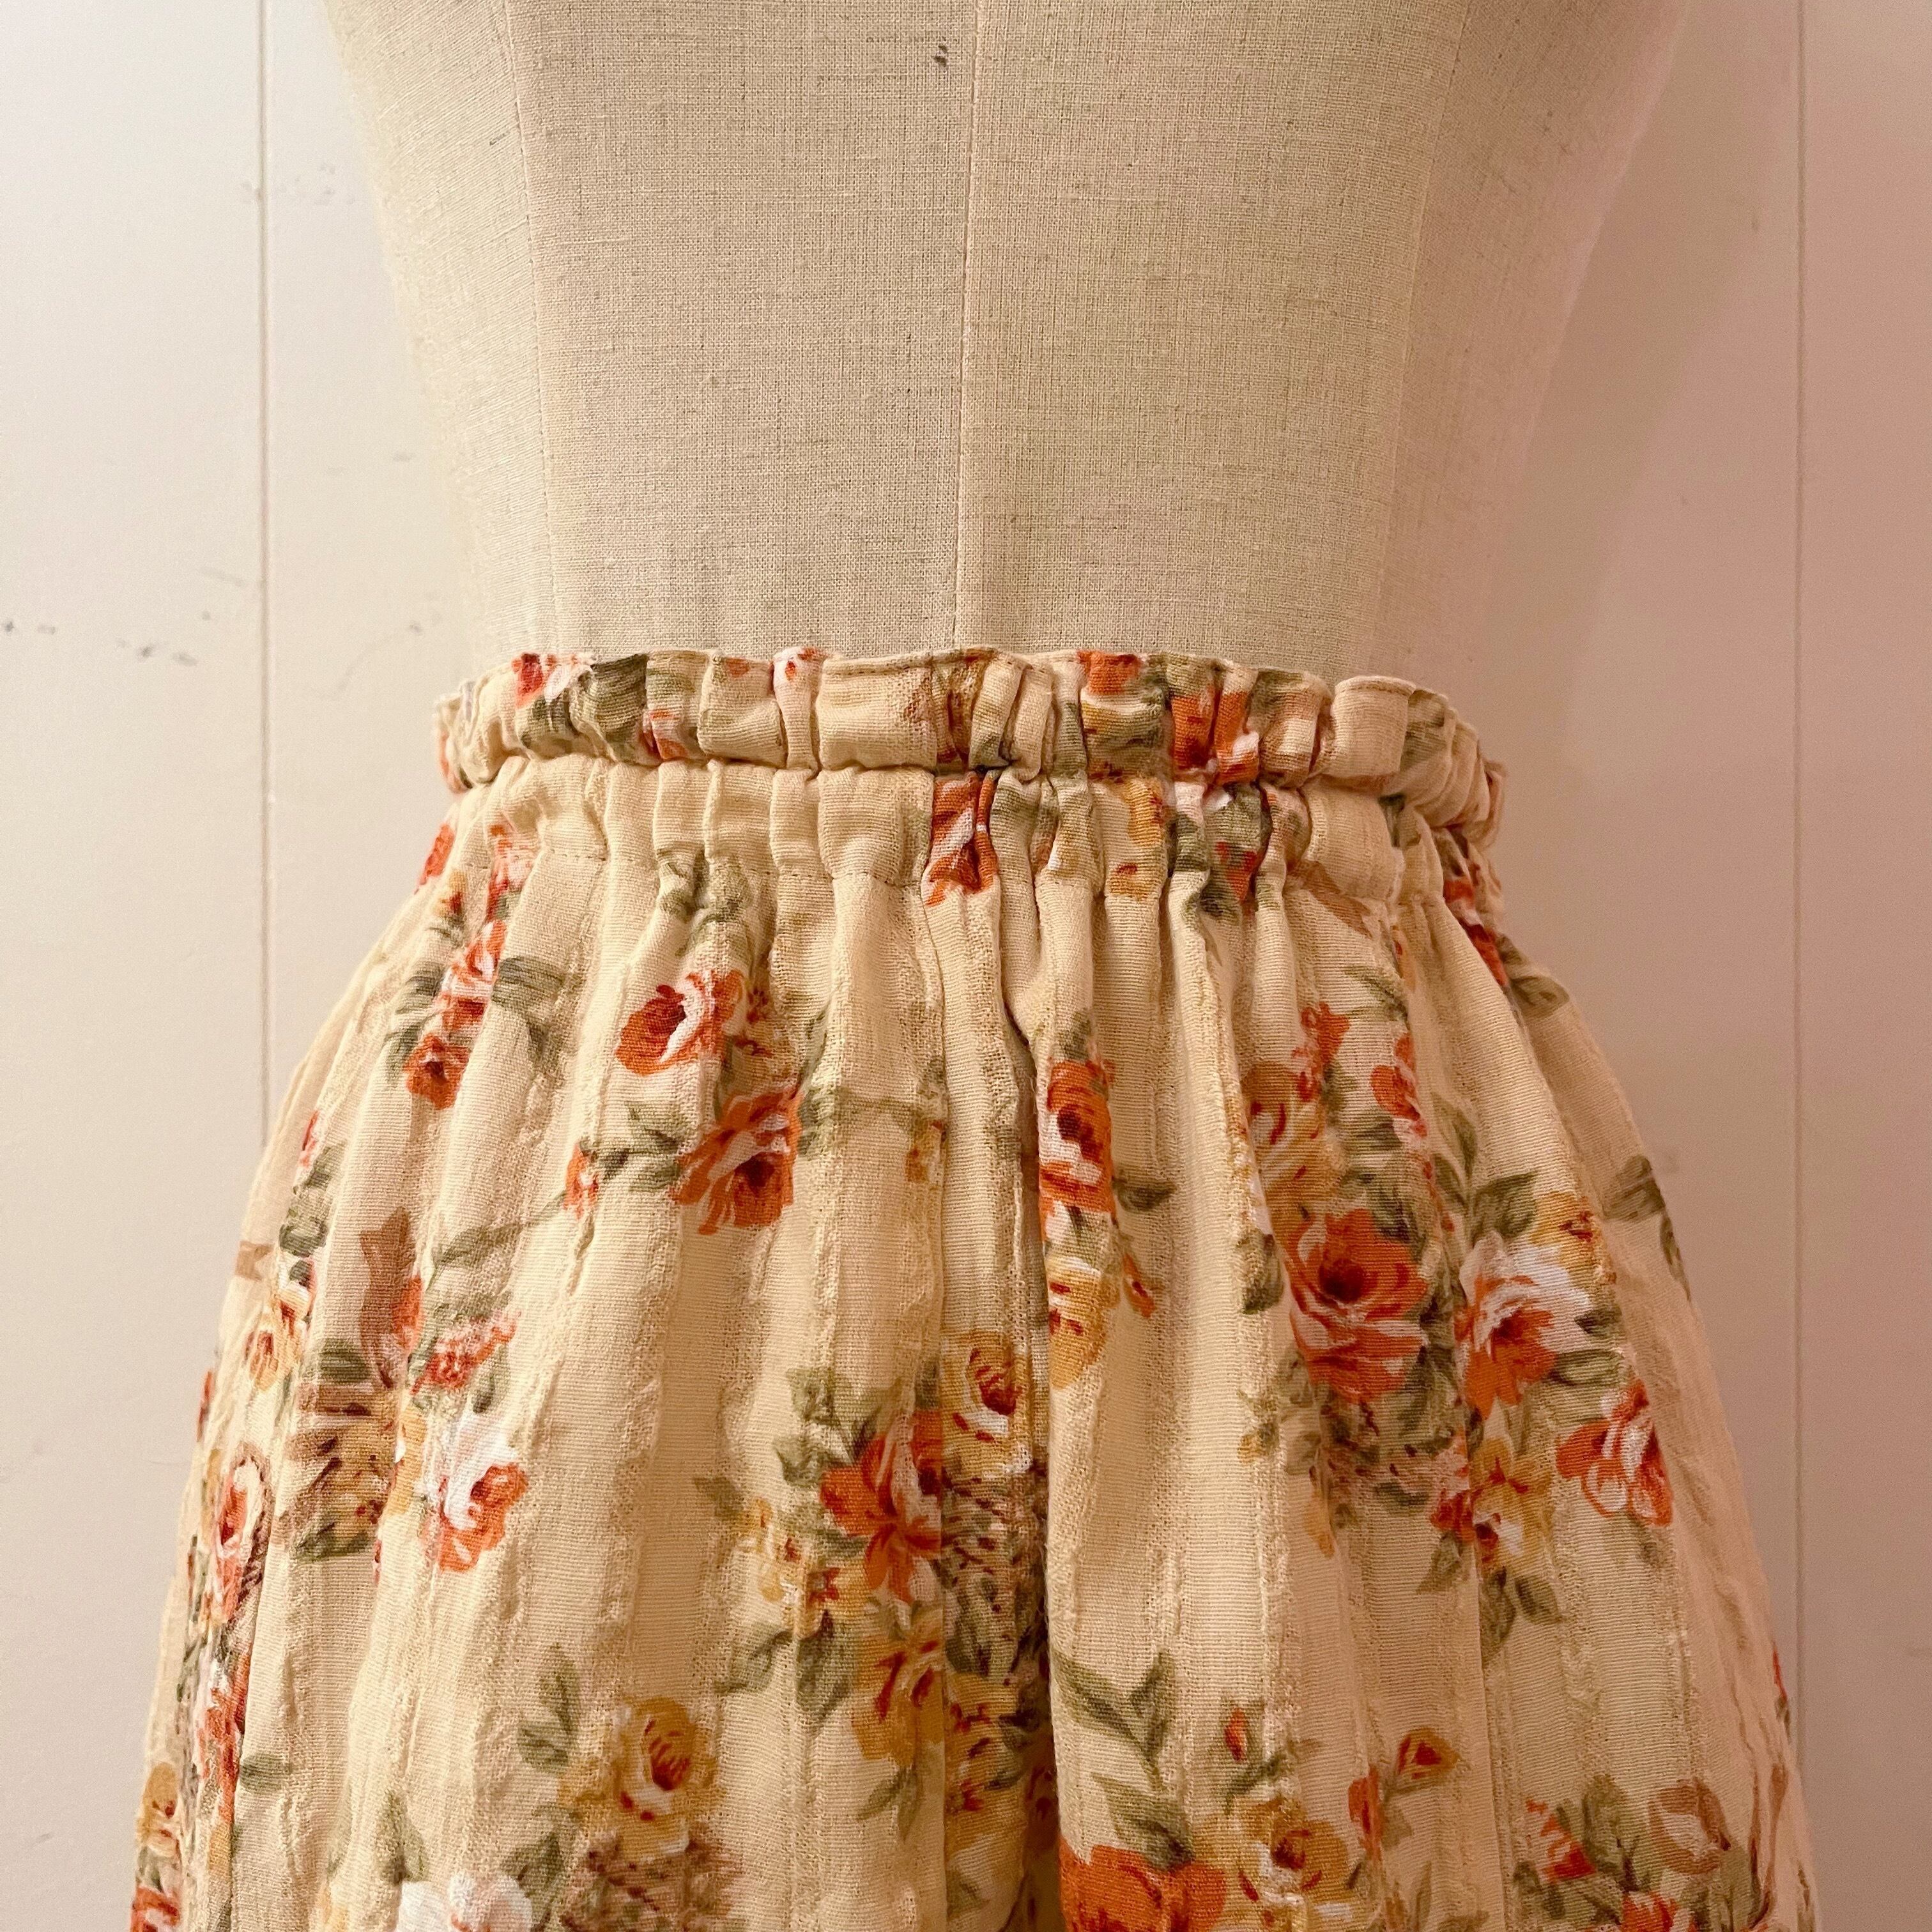 flower lace rose gather skirt